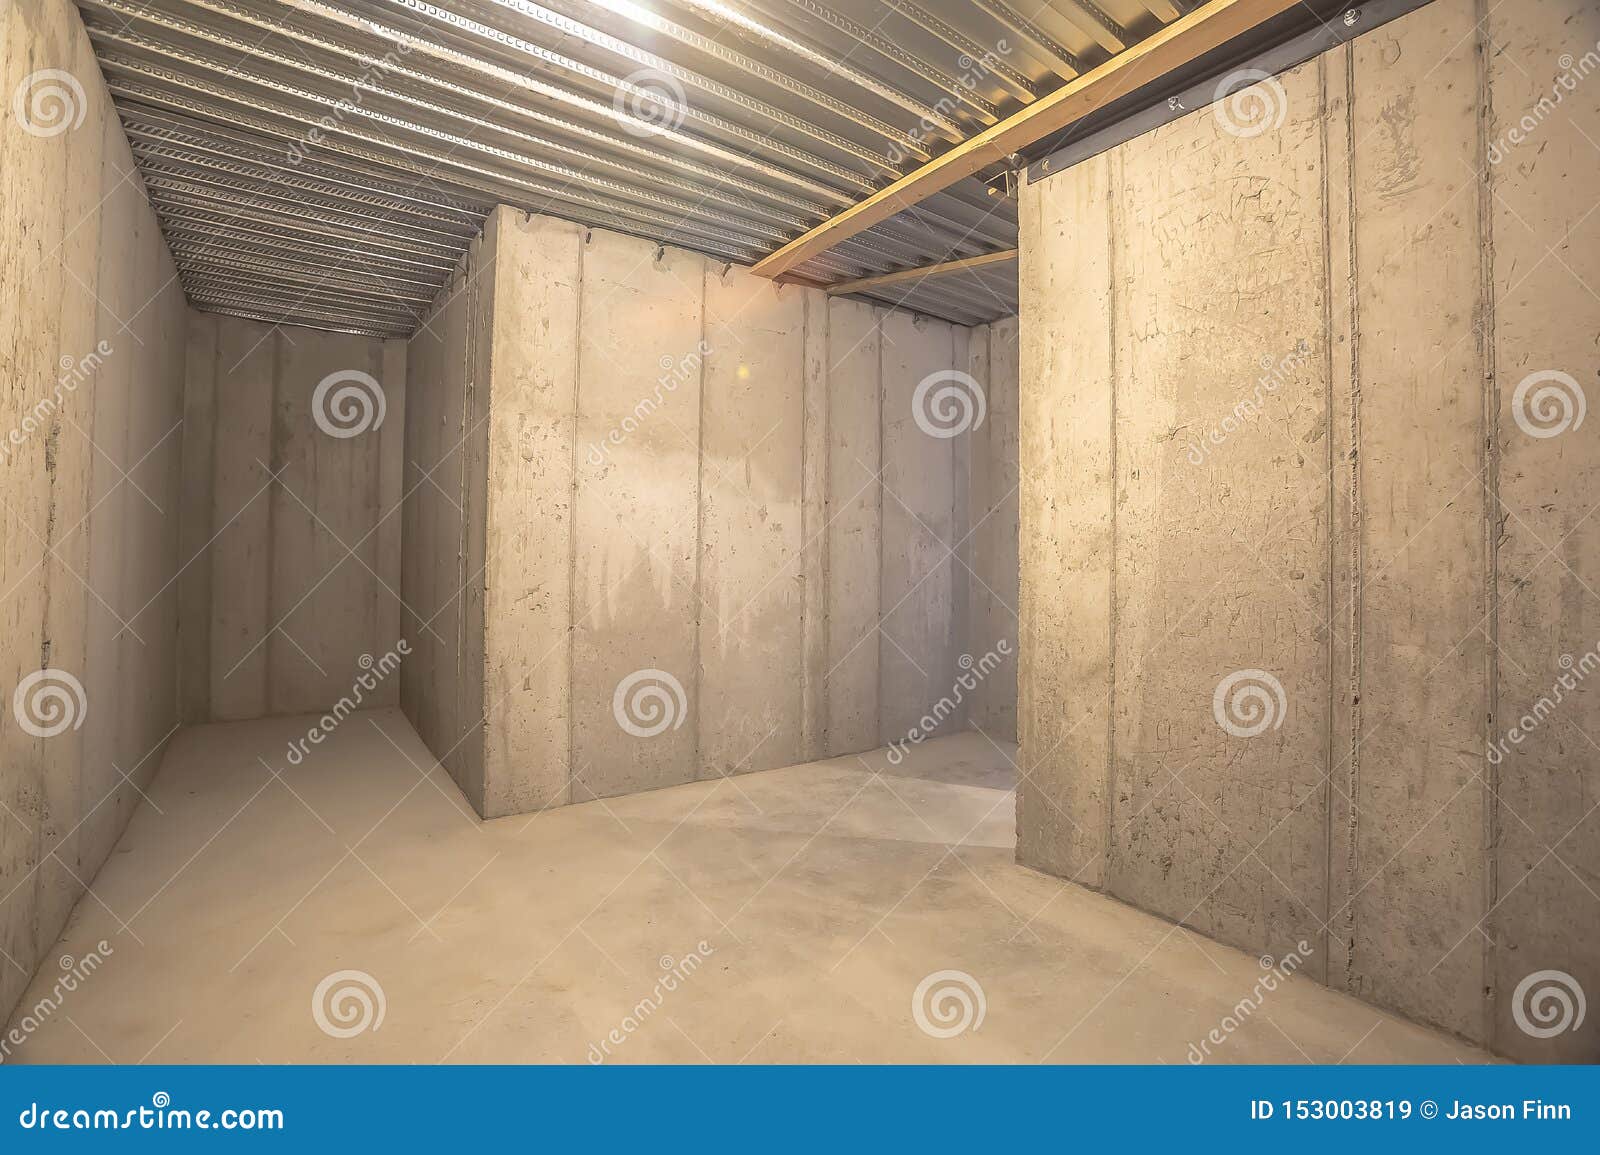 Interior Of An Empty Building With Concrete Wall And